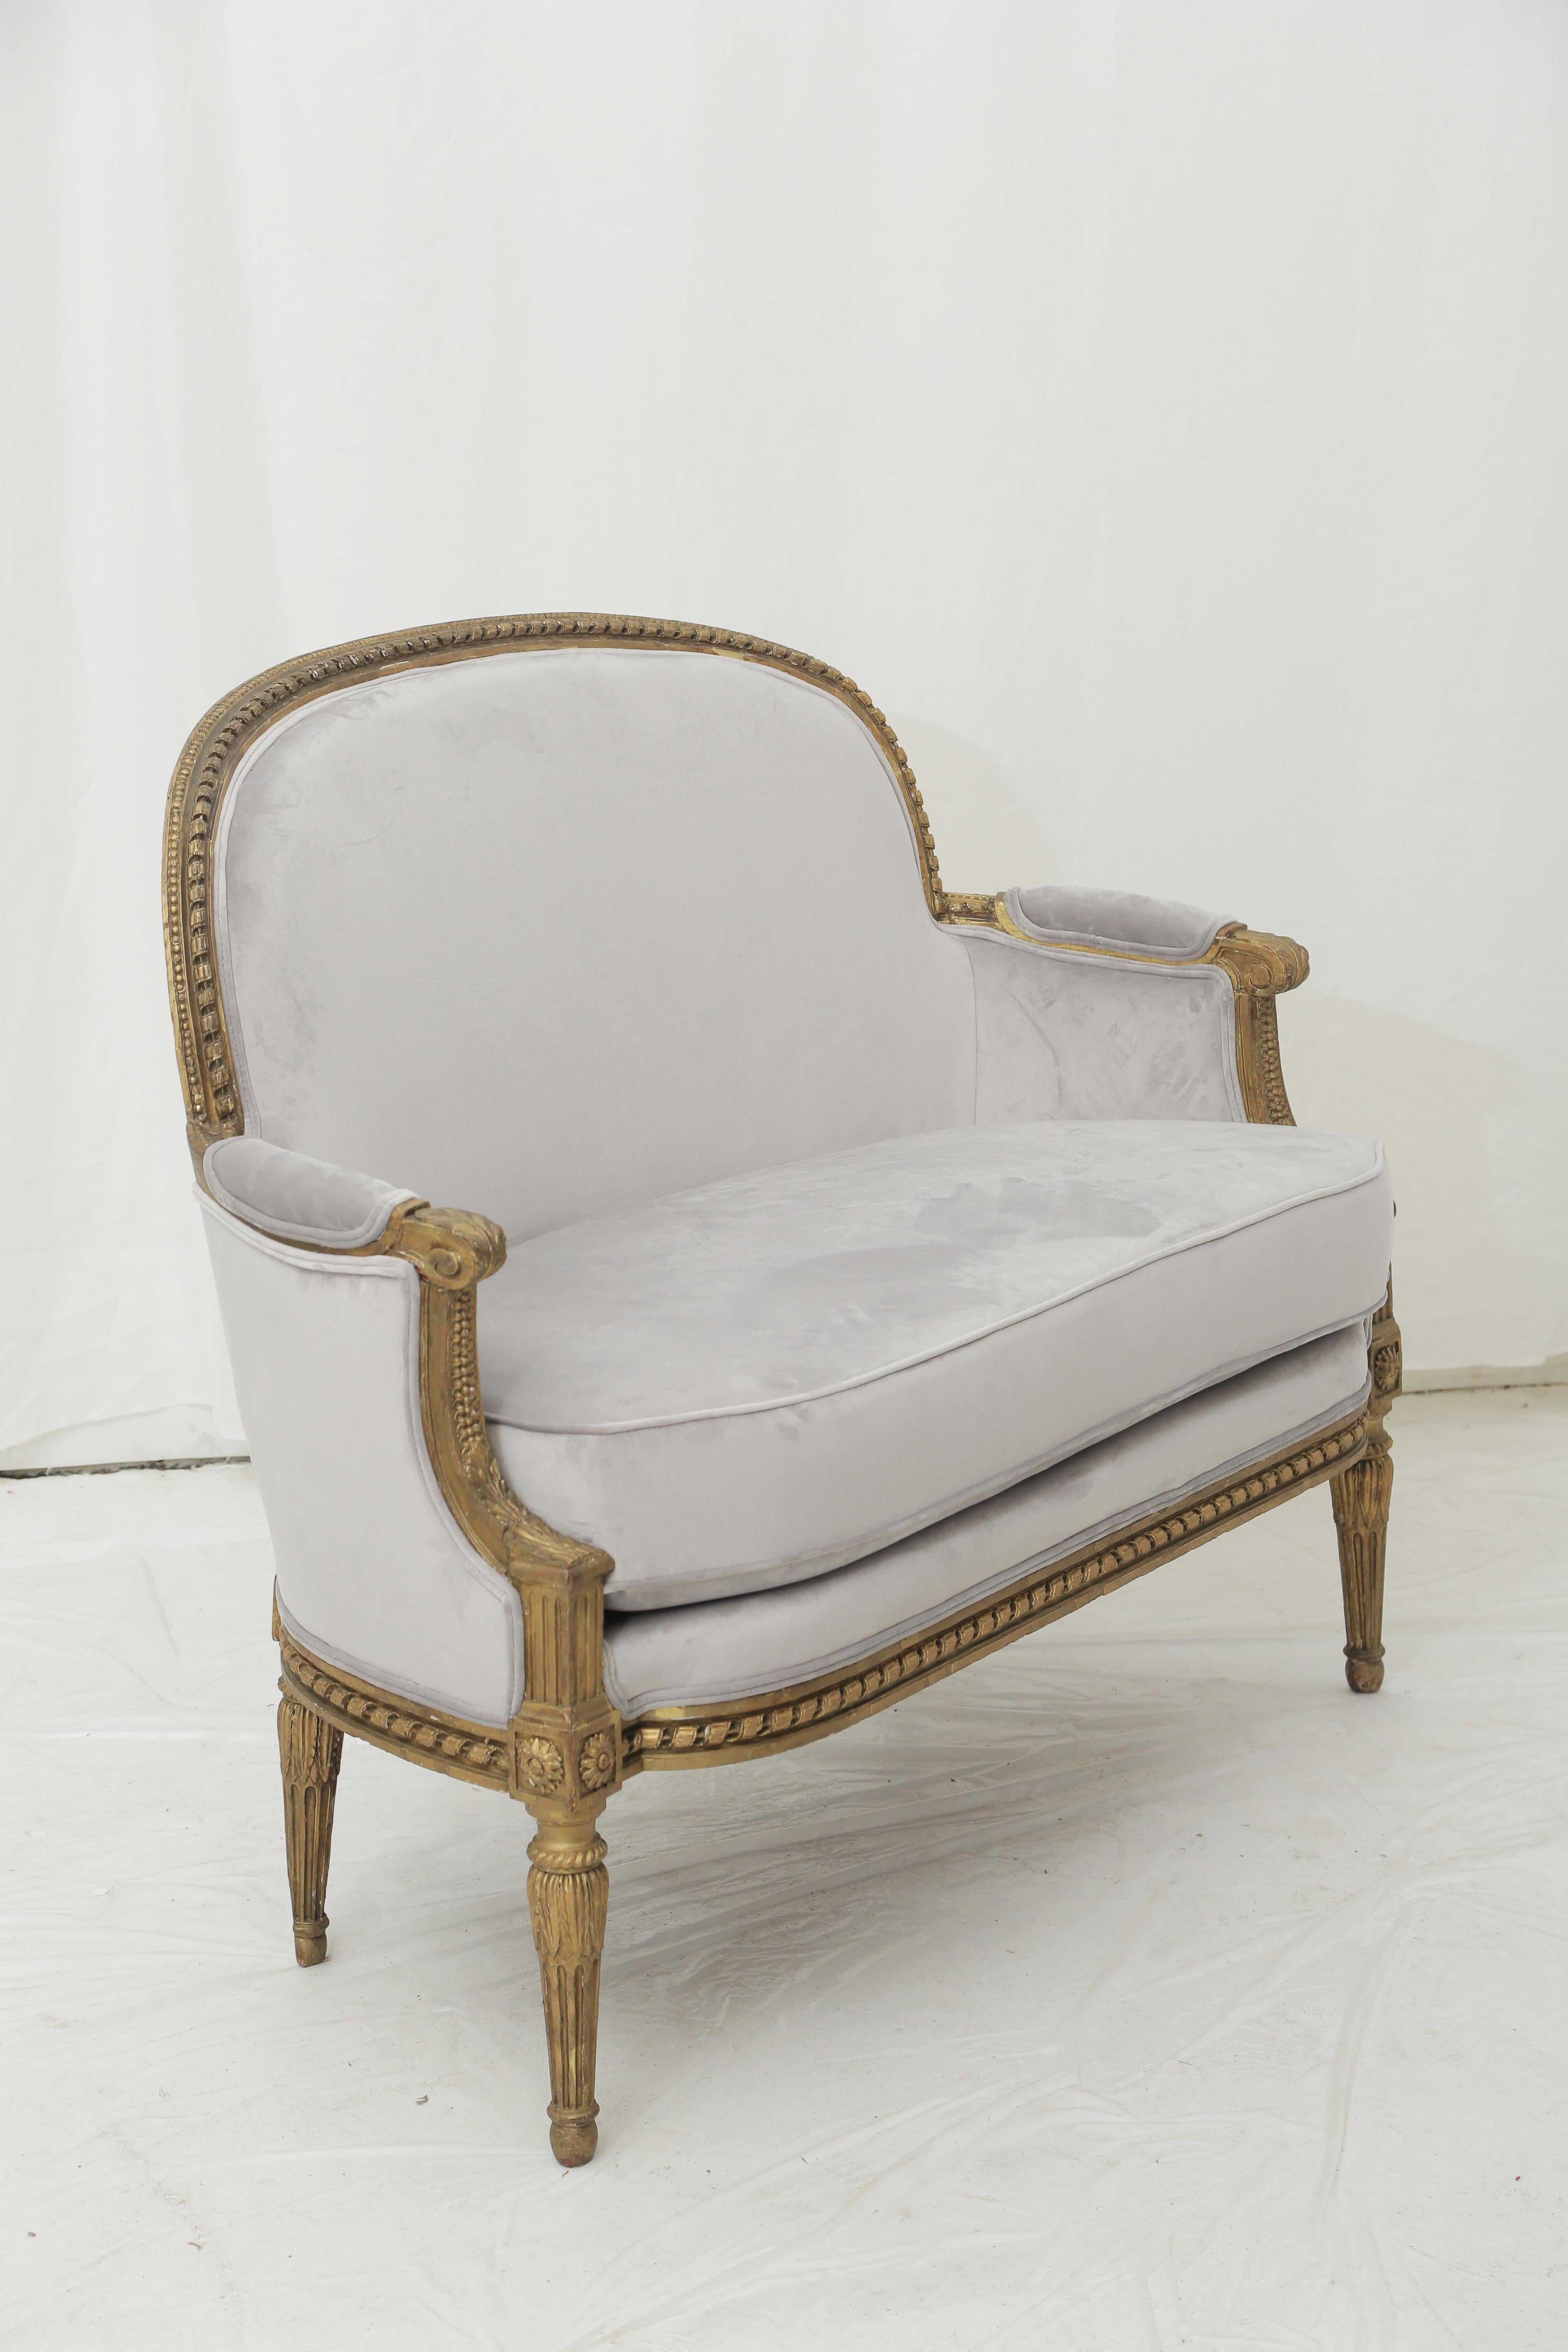 Recently refinished, this French loveseat is in the Louis XVI style. Carved giltwood and pale grey soft suede upholstery. From the end of the 19th century. Tight beech frame. Some slight gaps in the sculpture and the layer of gold on the back of the